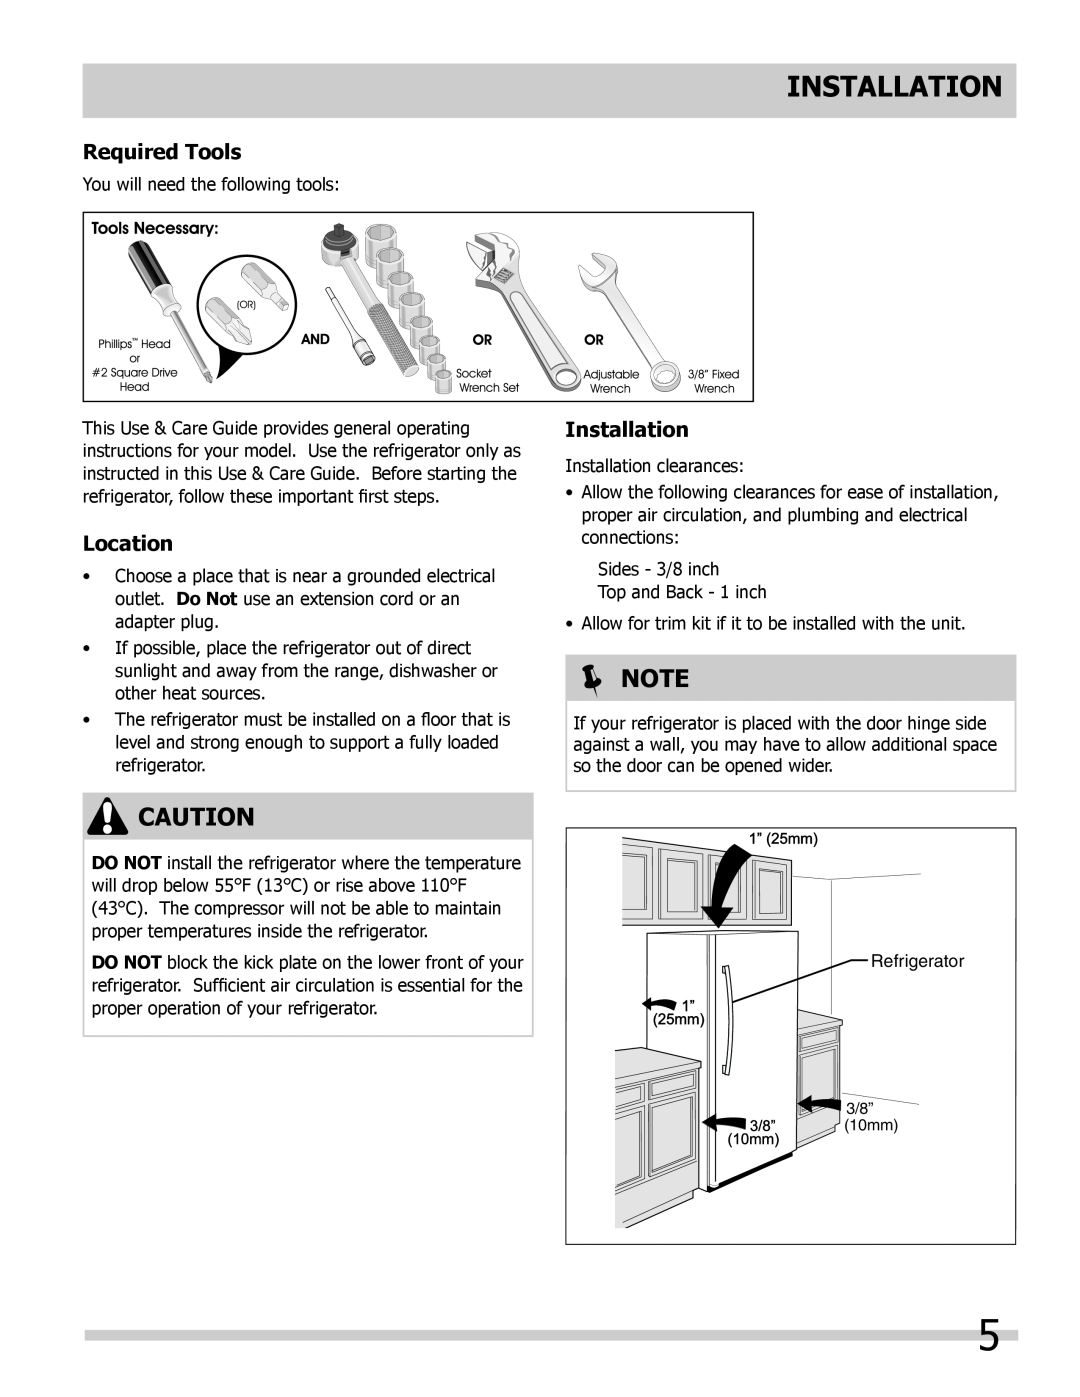 Frigidaire FPRH19D7LF, 297298700 manual Installation, Required Tools, Location,  Note 